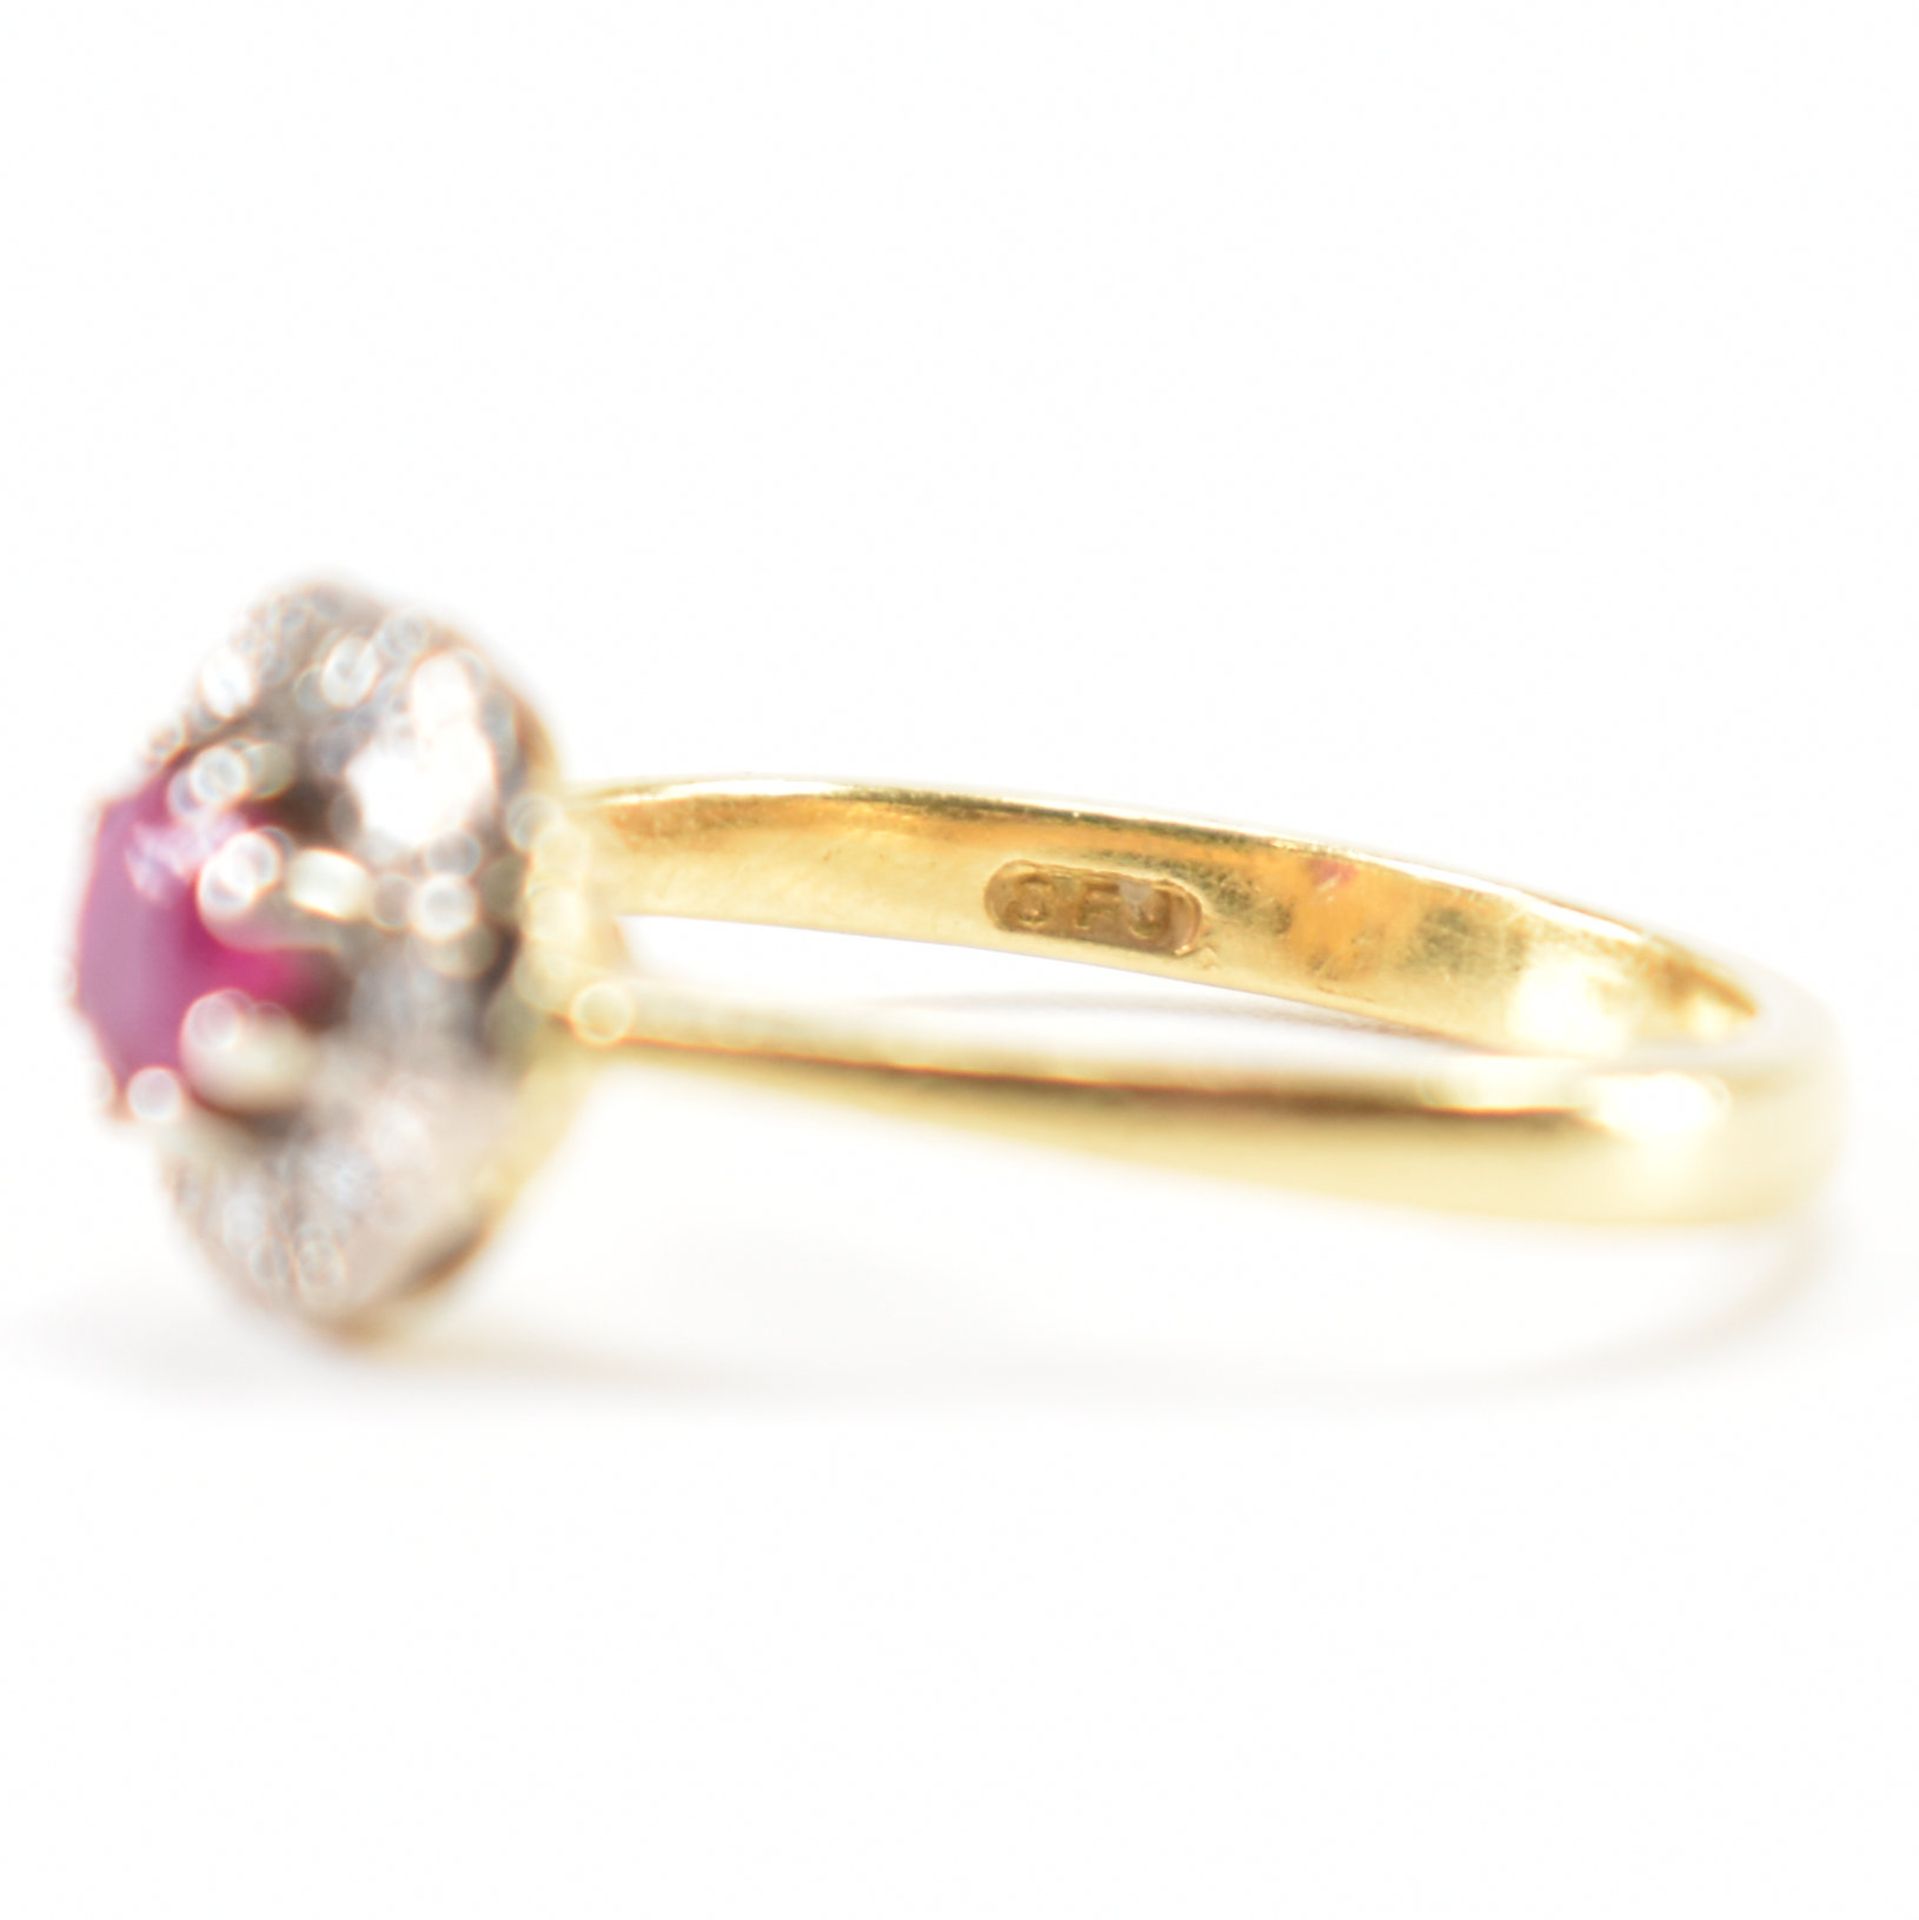 HALLMARKED 18CT GOLD RUBY & DIAMOND CLUSTER RING - Image 7 of 9